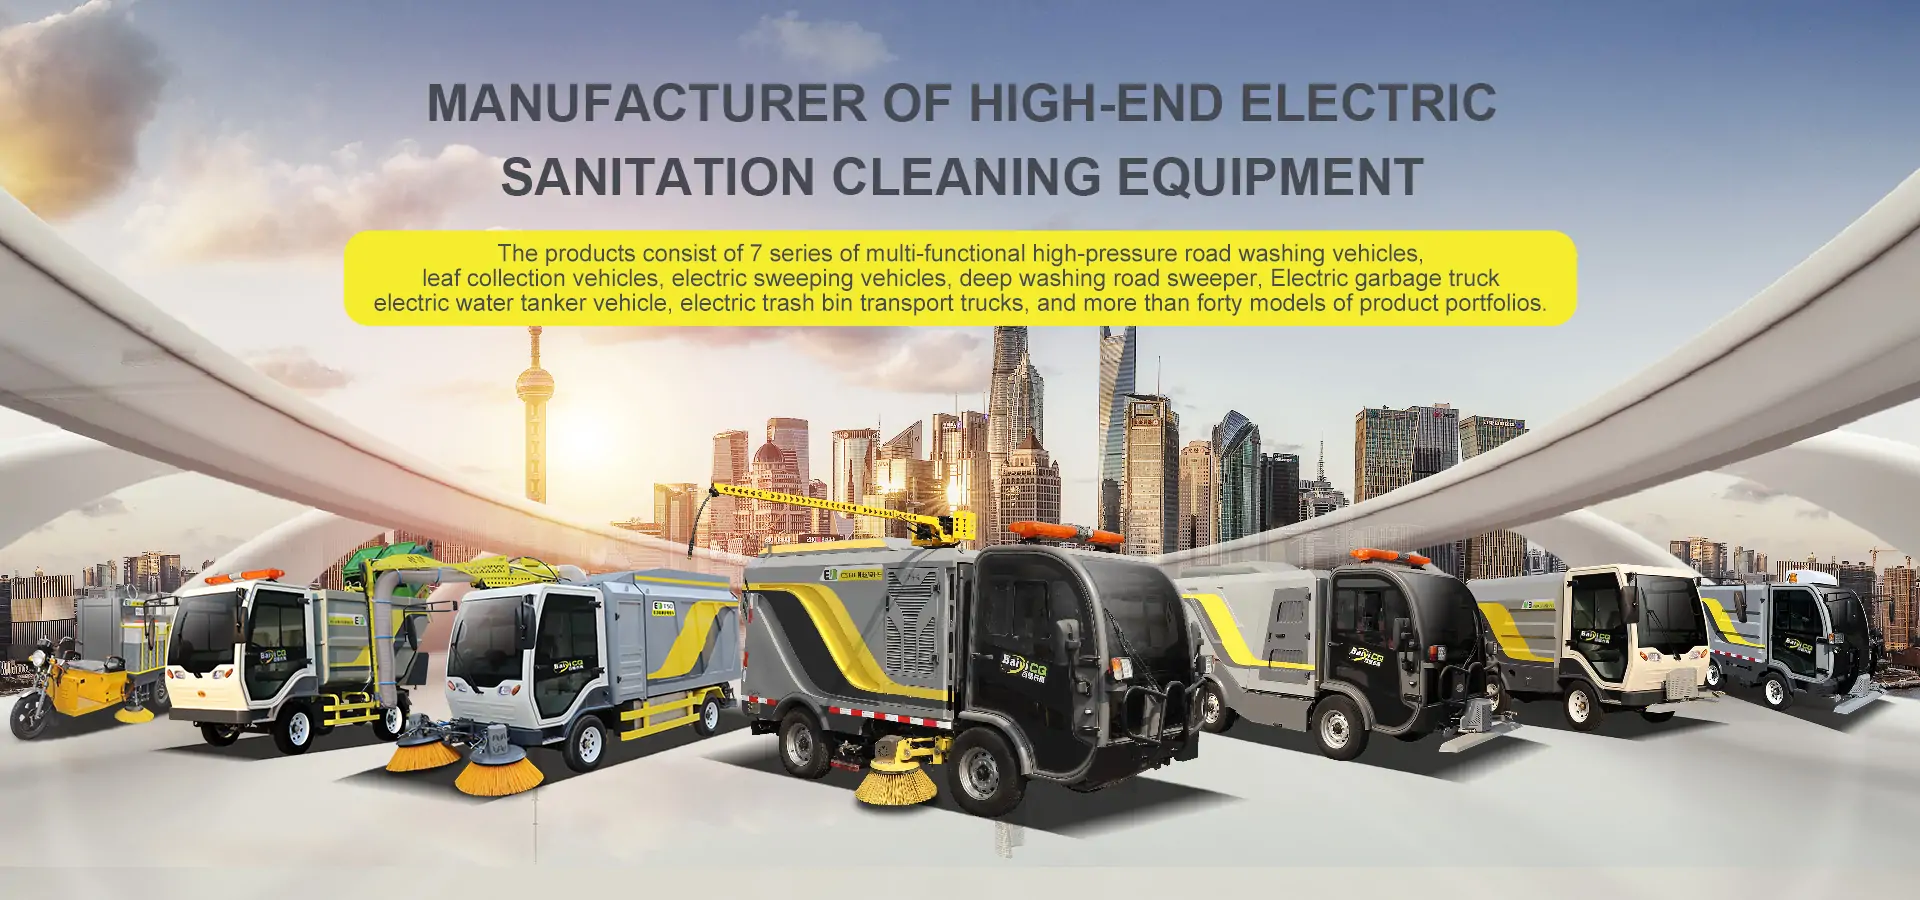 High-end electric sanitation cleaning vehicle